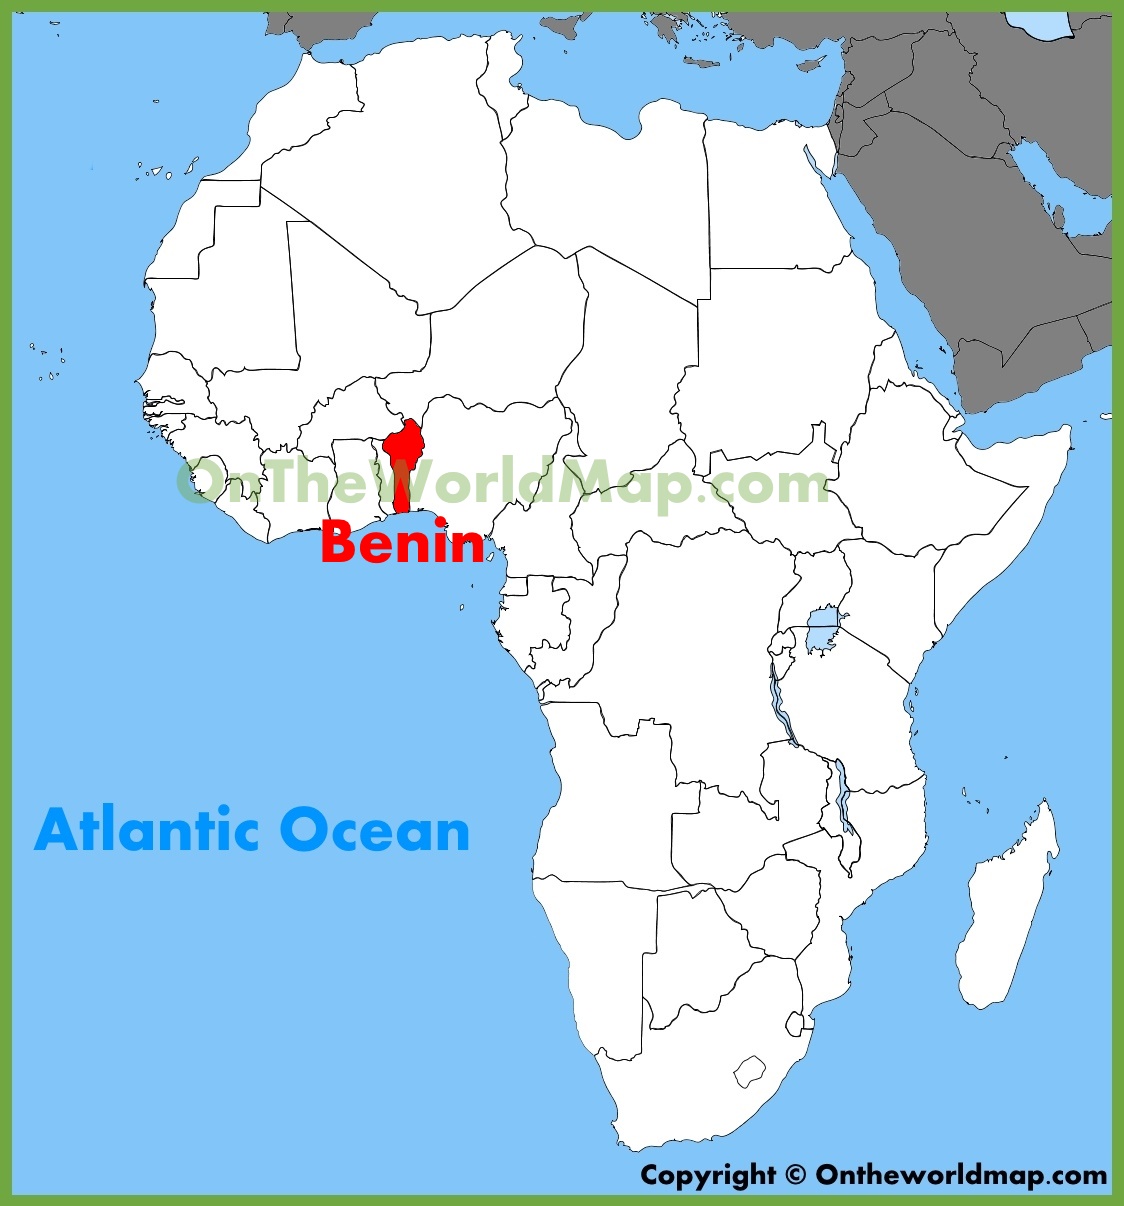 Benin Location On The Africa Map